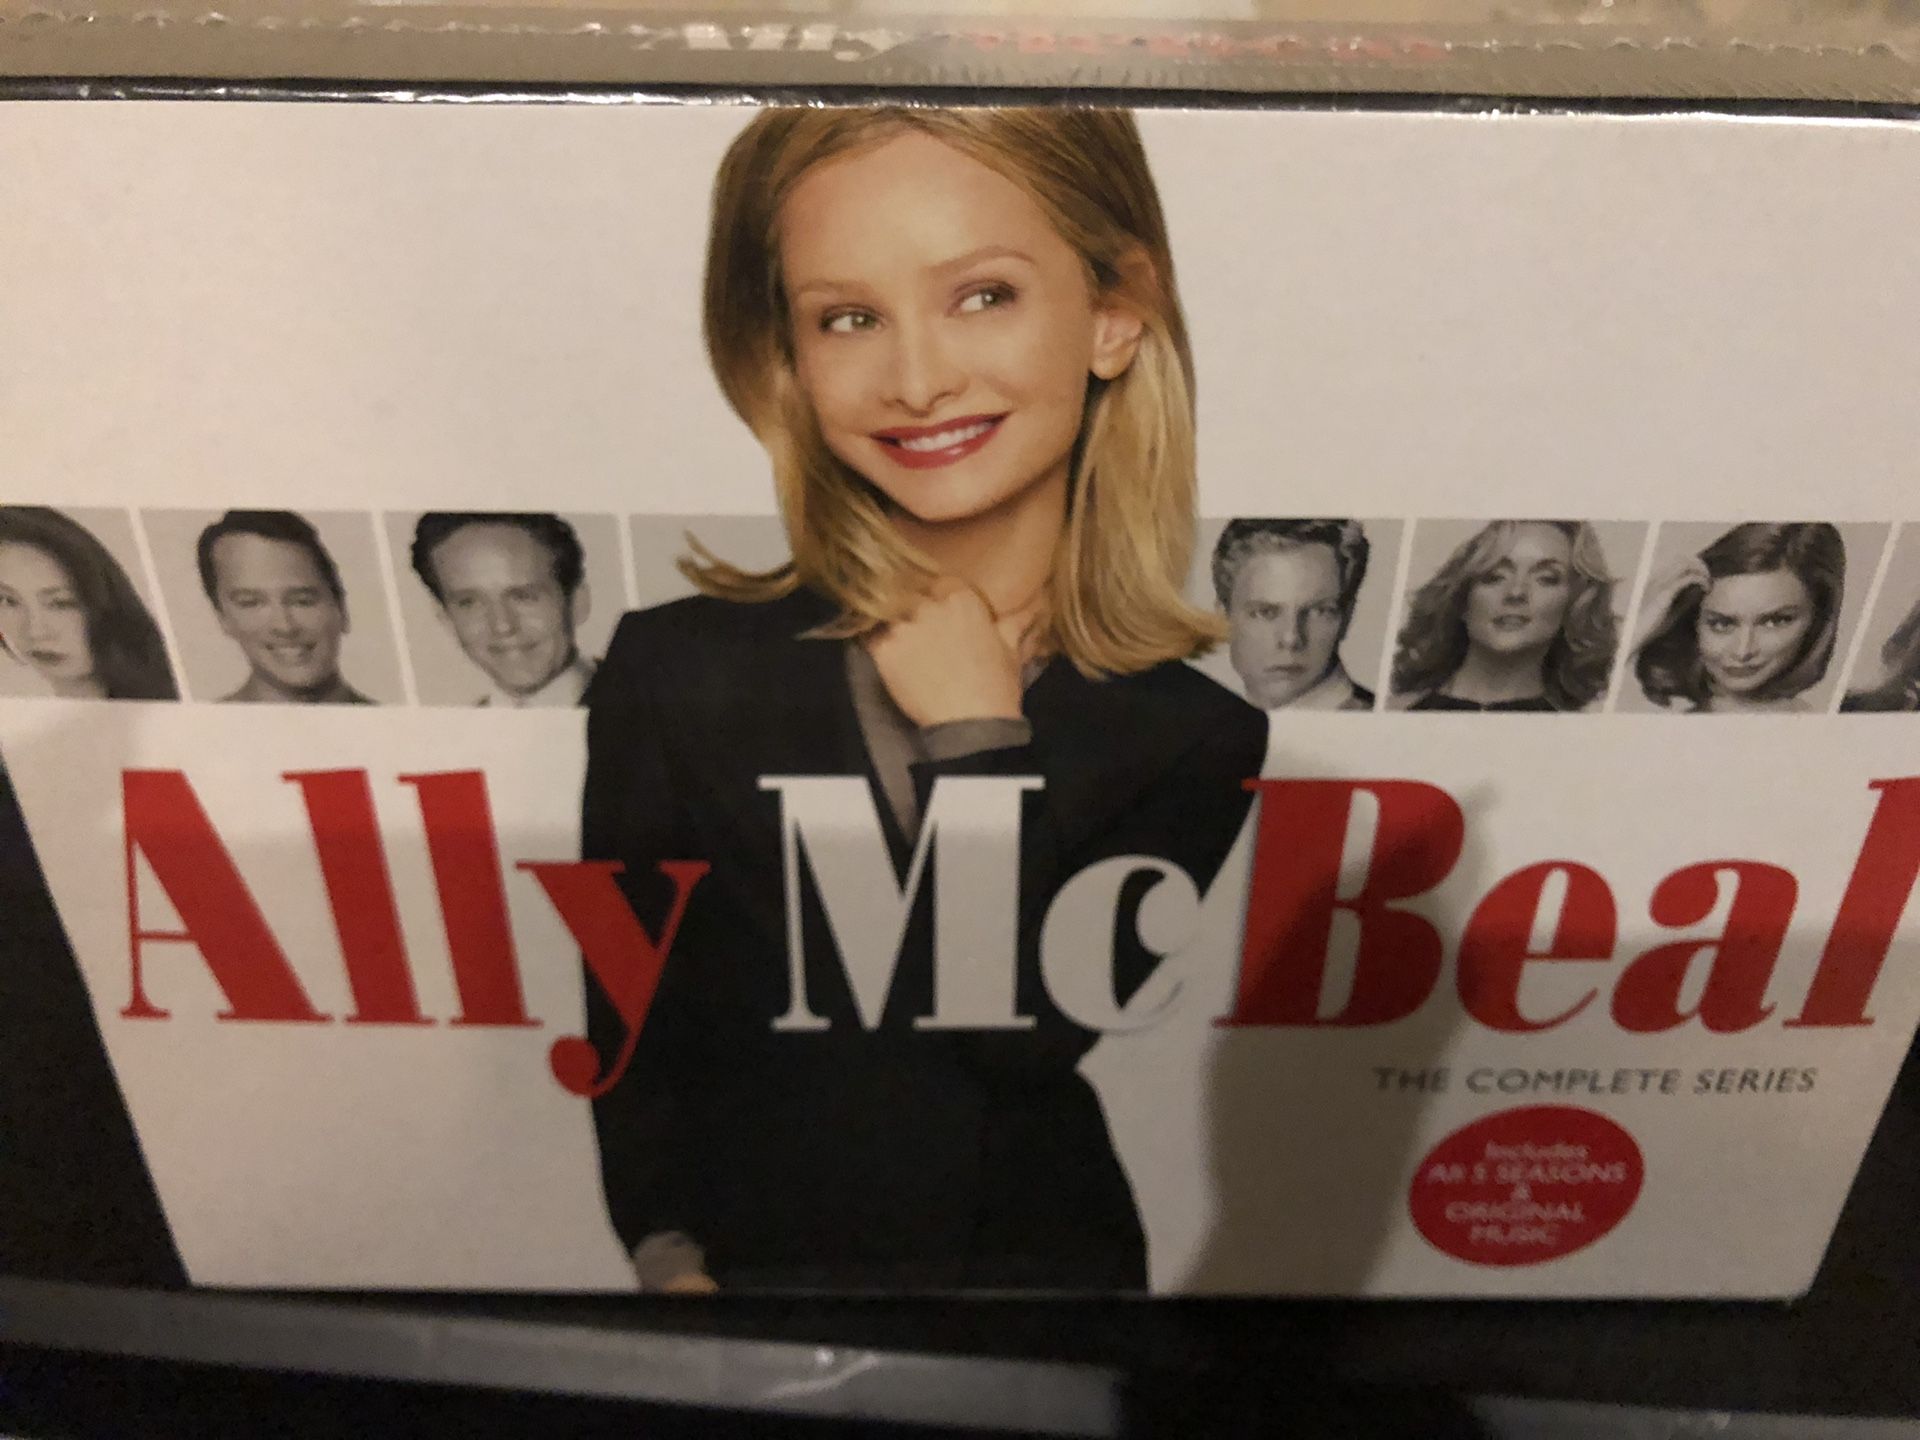 Never opened Ally McBeal, complete season